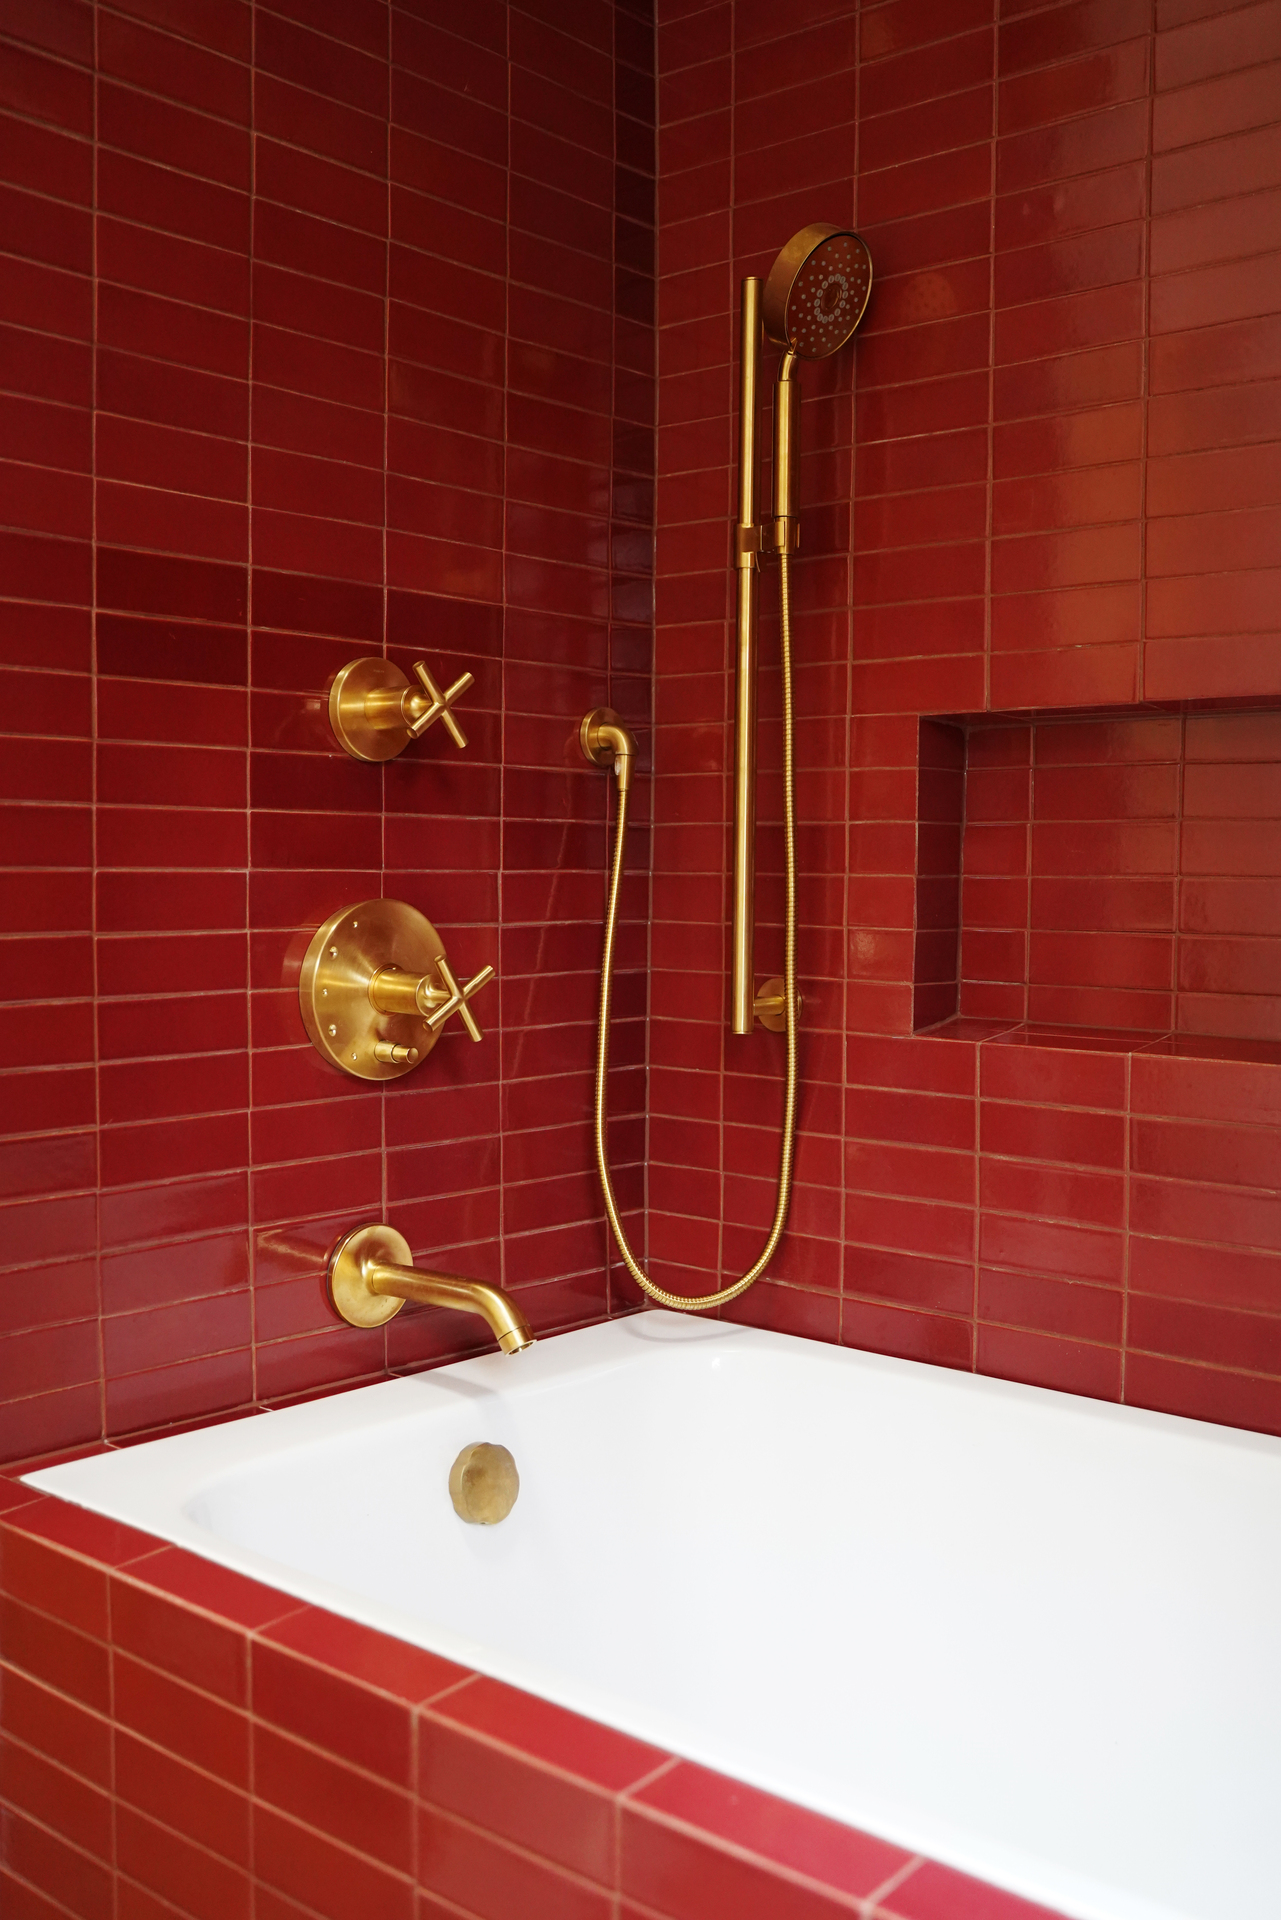 Modern bathroom design with red tiles